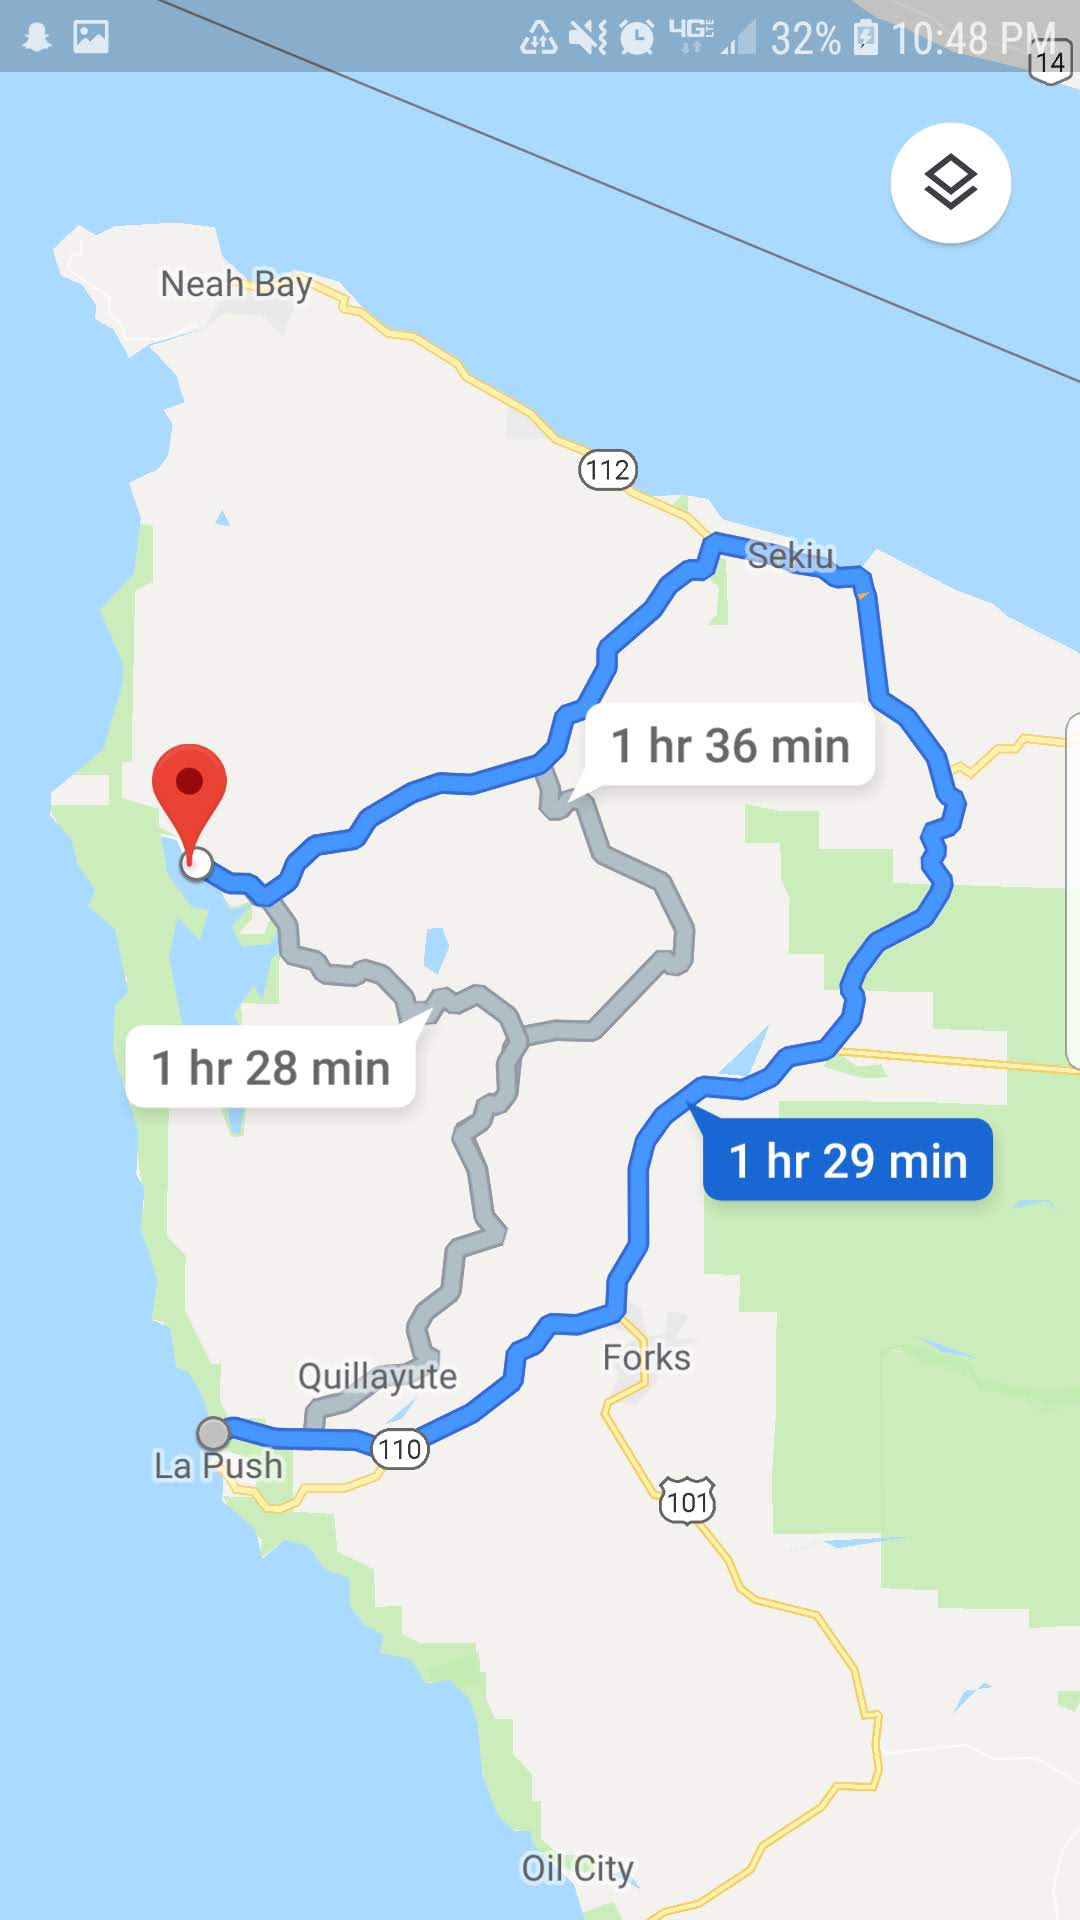 We took a gamble and decided to try hitch-hiking. Four different cars picked us up and we made it back to Ozette Lake and our car in under 3 hours. People are awesome! Saved us $120, had we gone with a shuttle company.